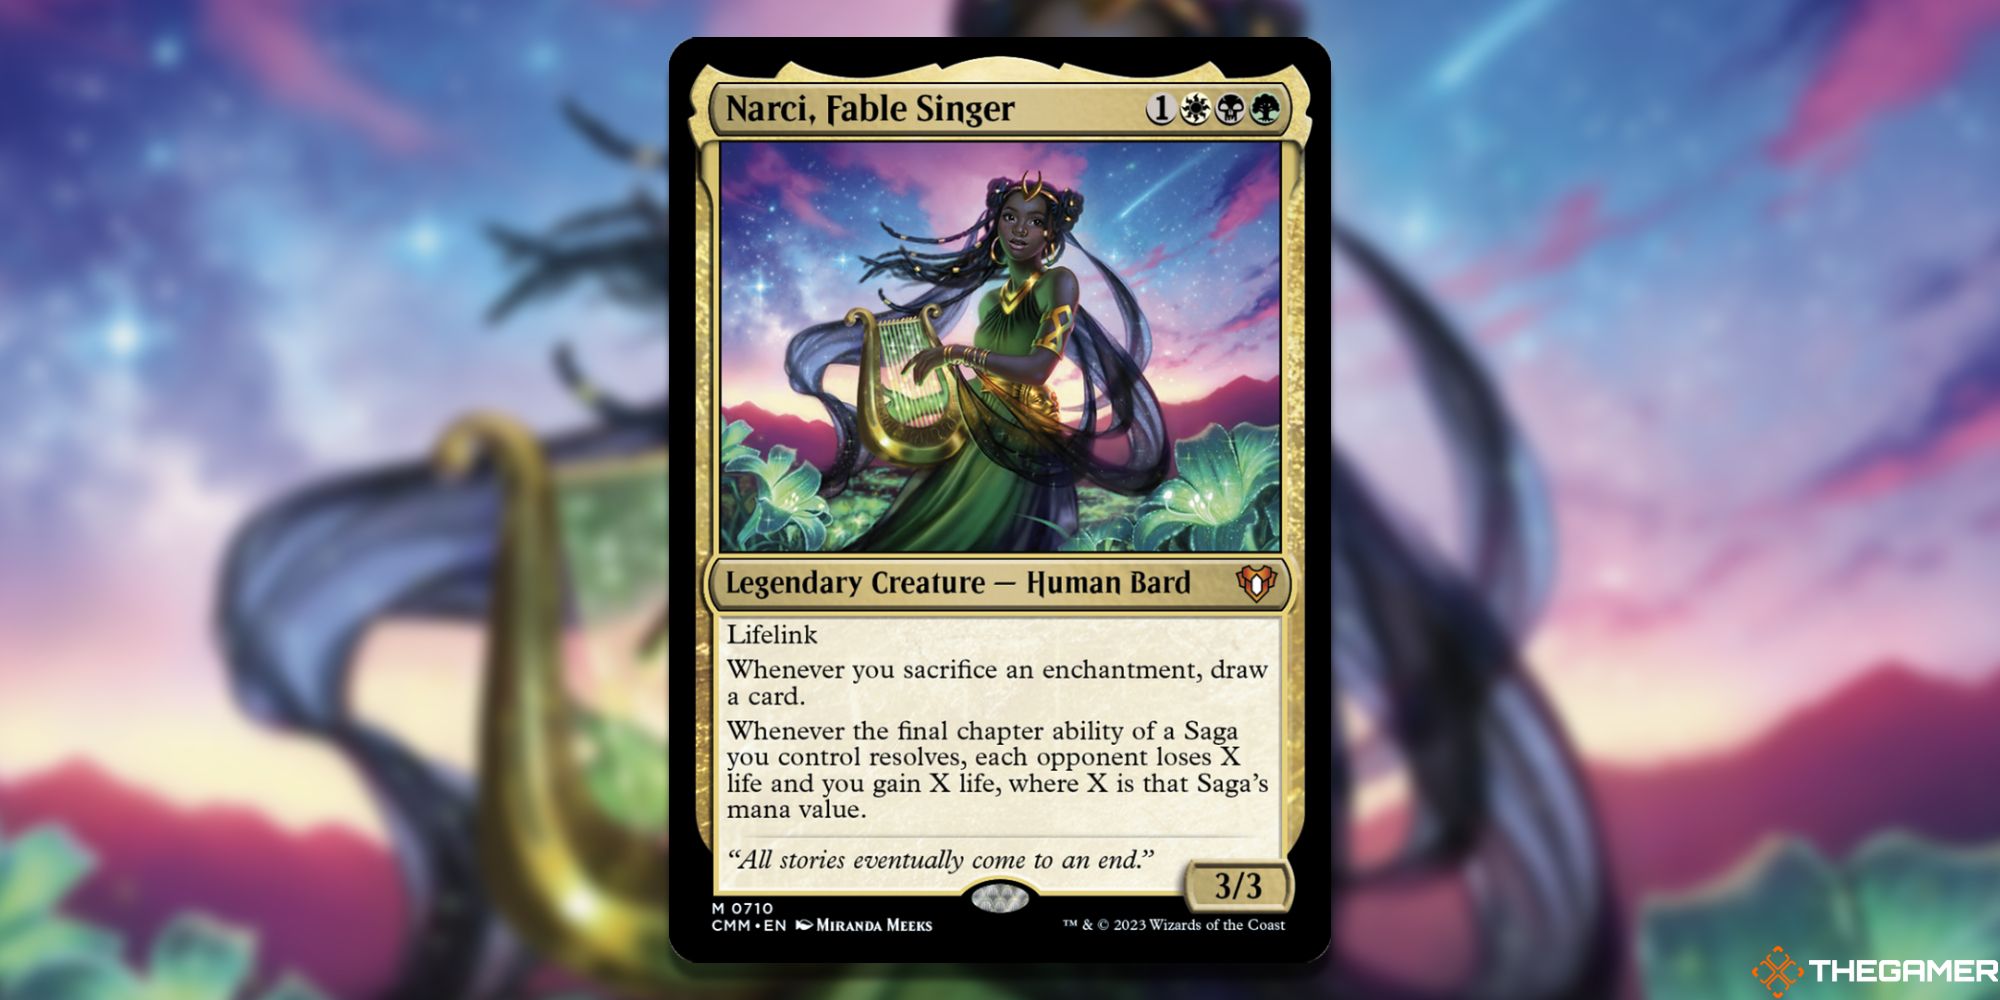 Image of the Narci, Fable Singer card in Magic: The Gathering, with art by Miranda Meeks